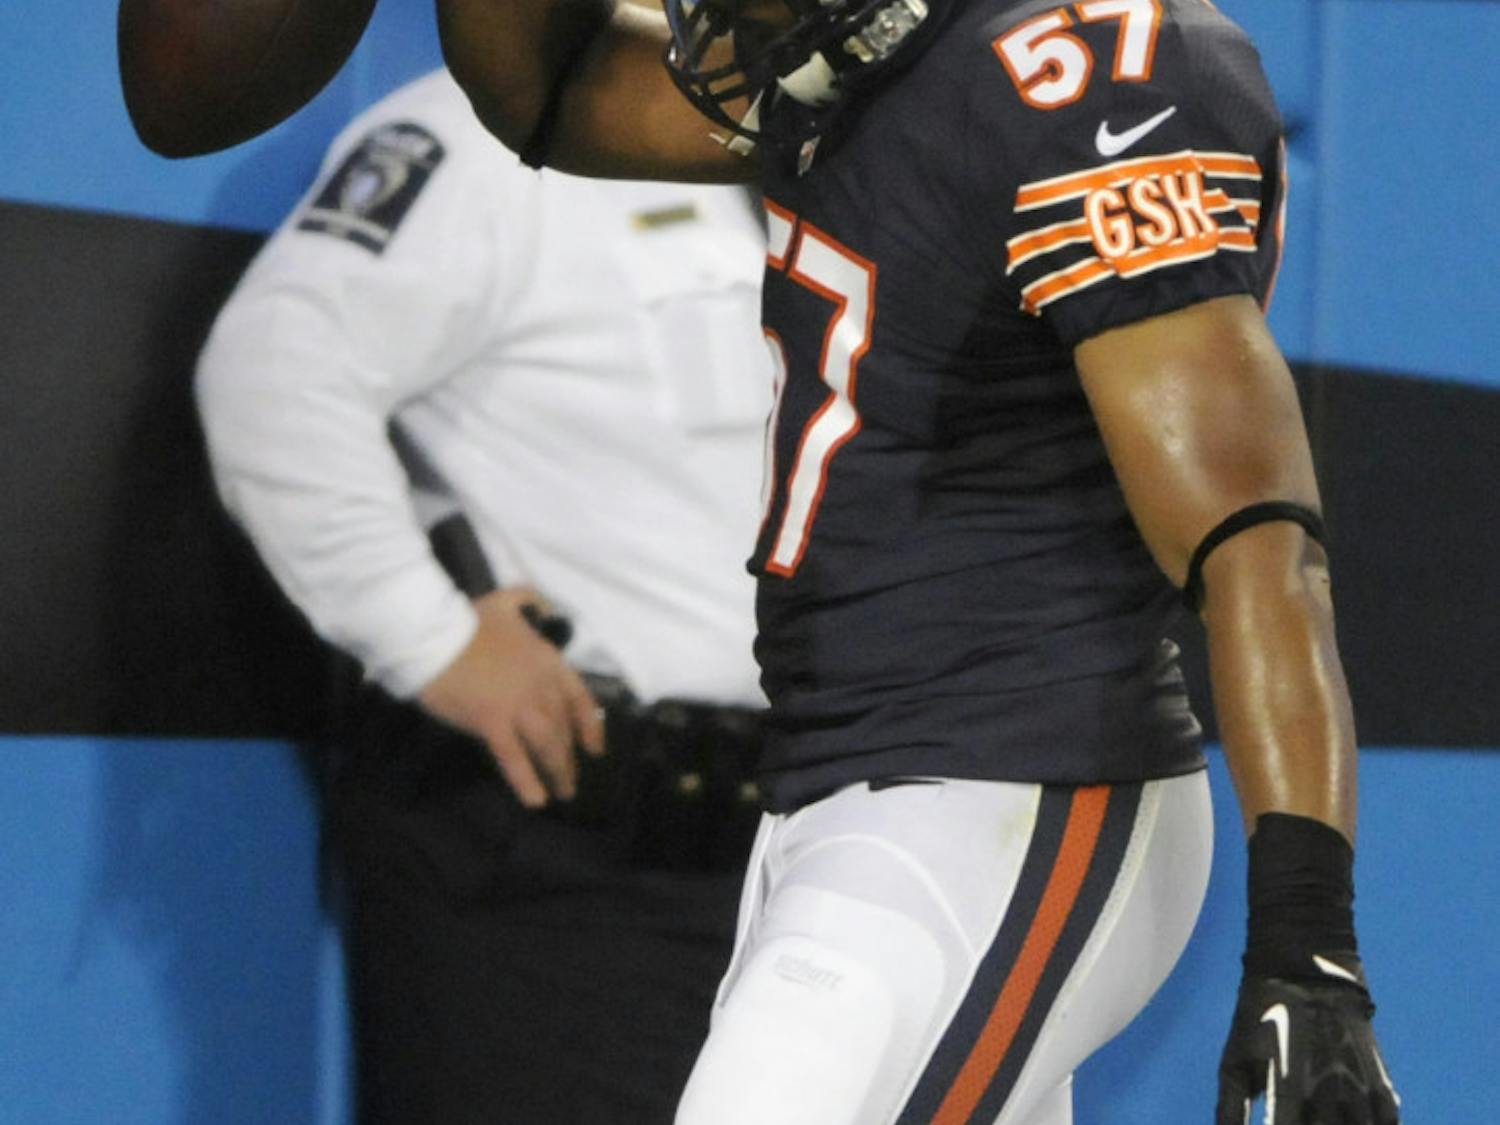 Chicago Bears' Jon Bostic (57) spikes the ball in the end zone after returning an interception for a touchdown against the Carolina Panthers during the first half of a preseason NFL football game in Charlotte, N.C., on Aug. 9.